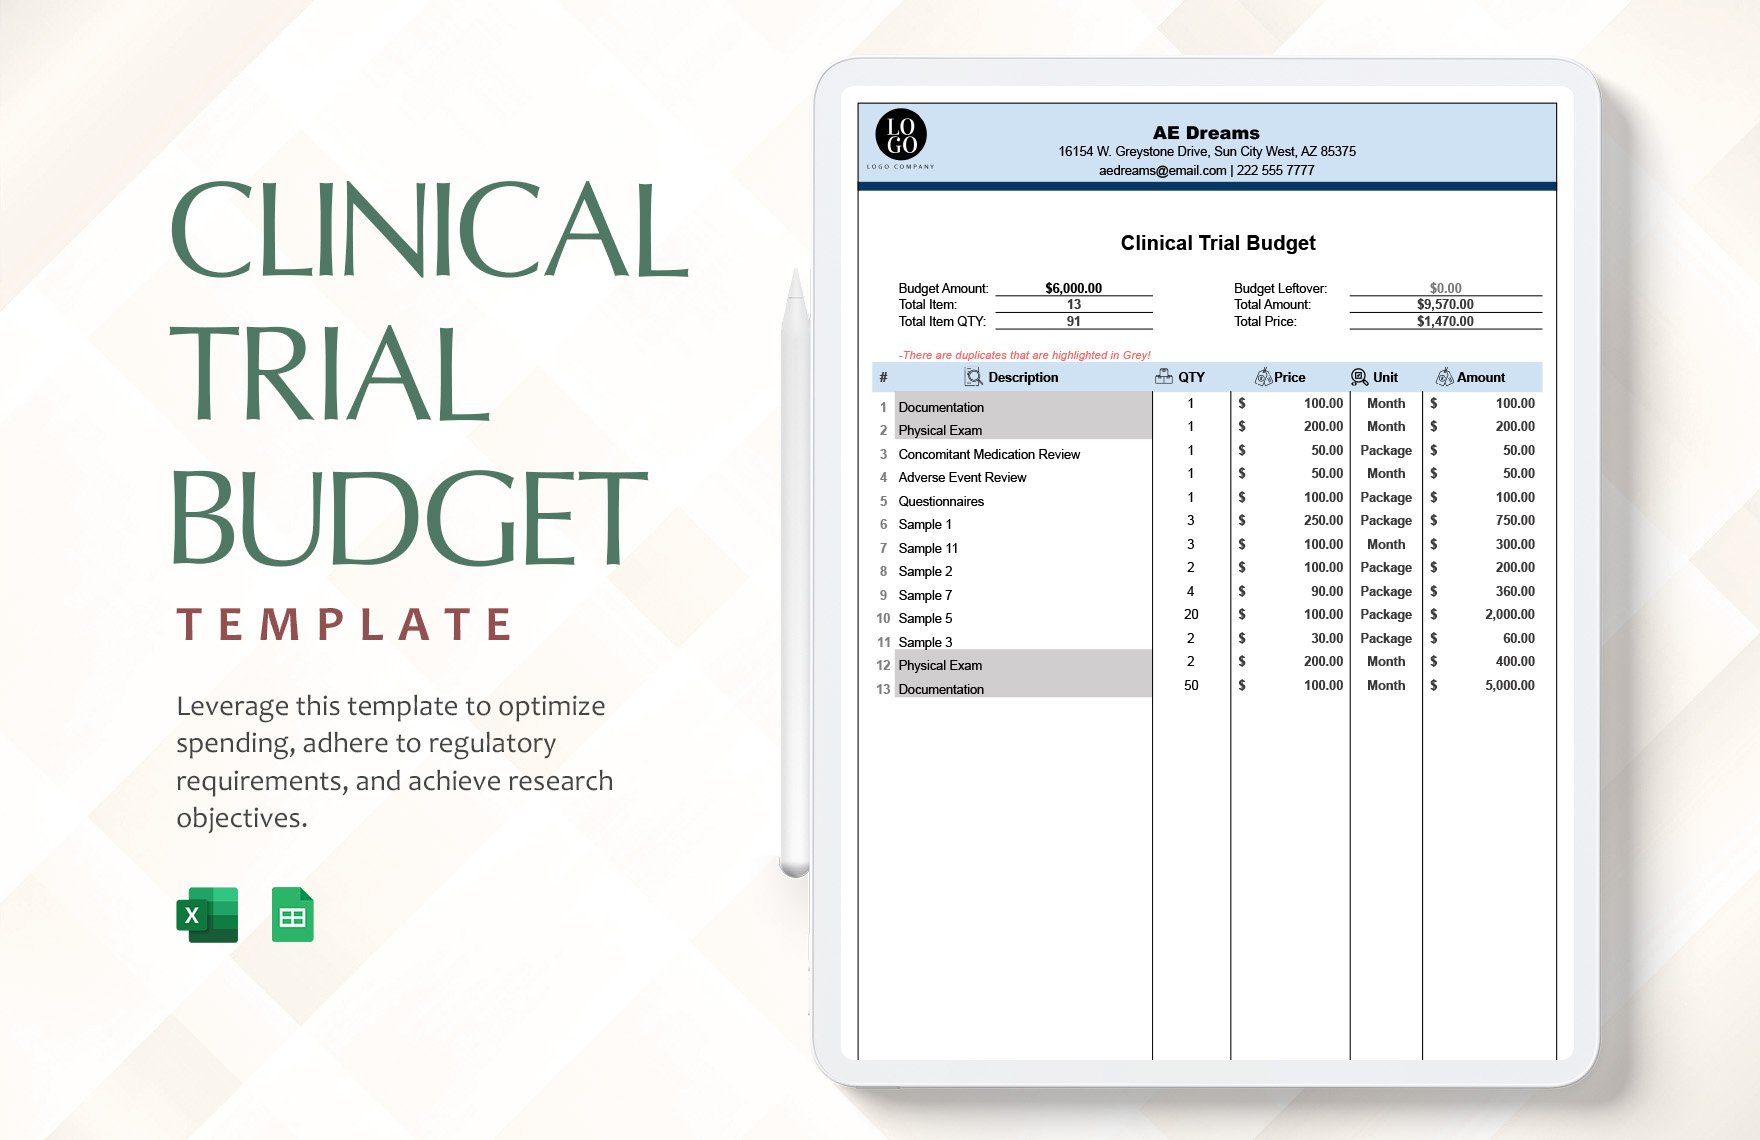 Clinical Trial Budget Template in Excel, Google Sheets